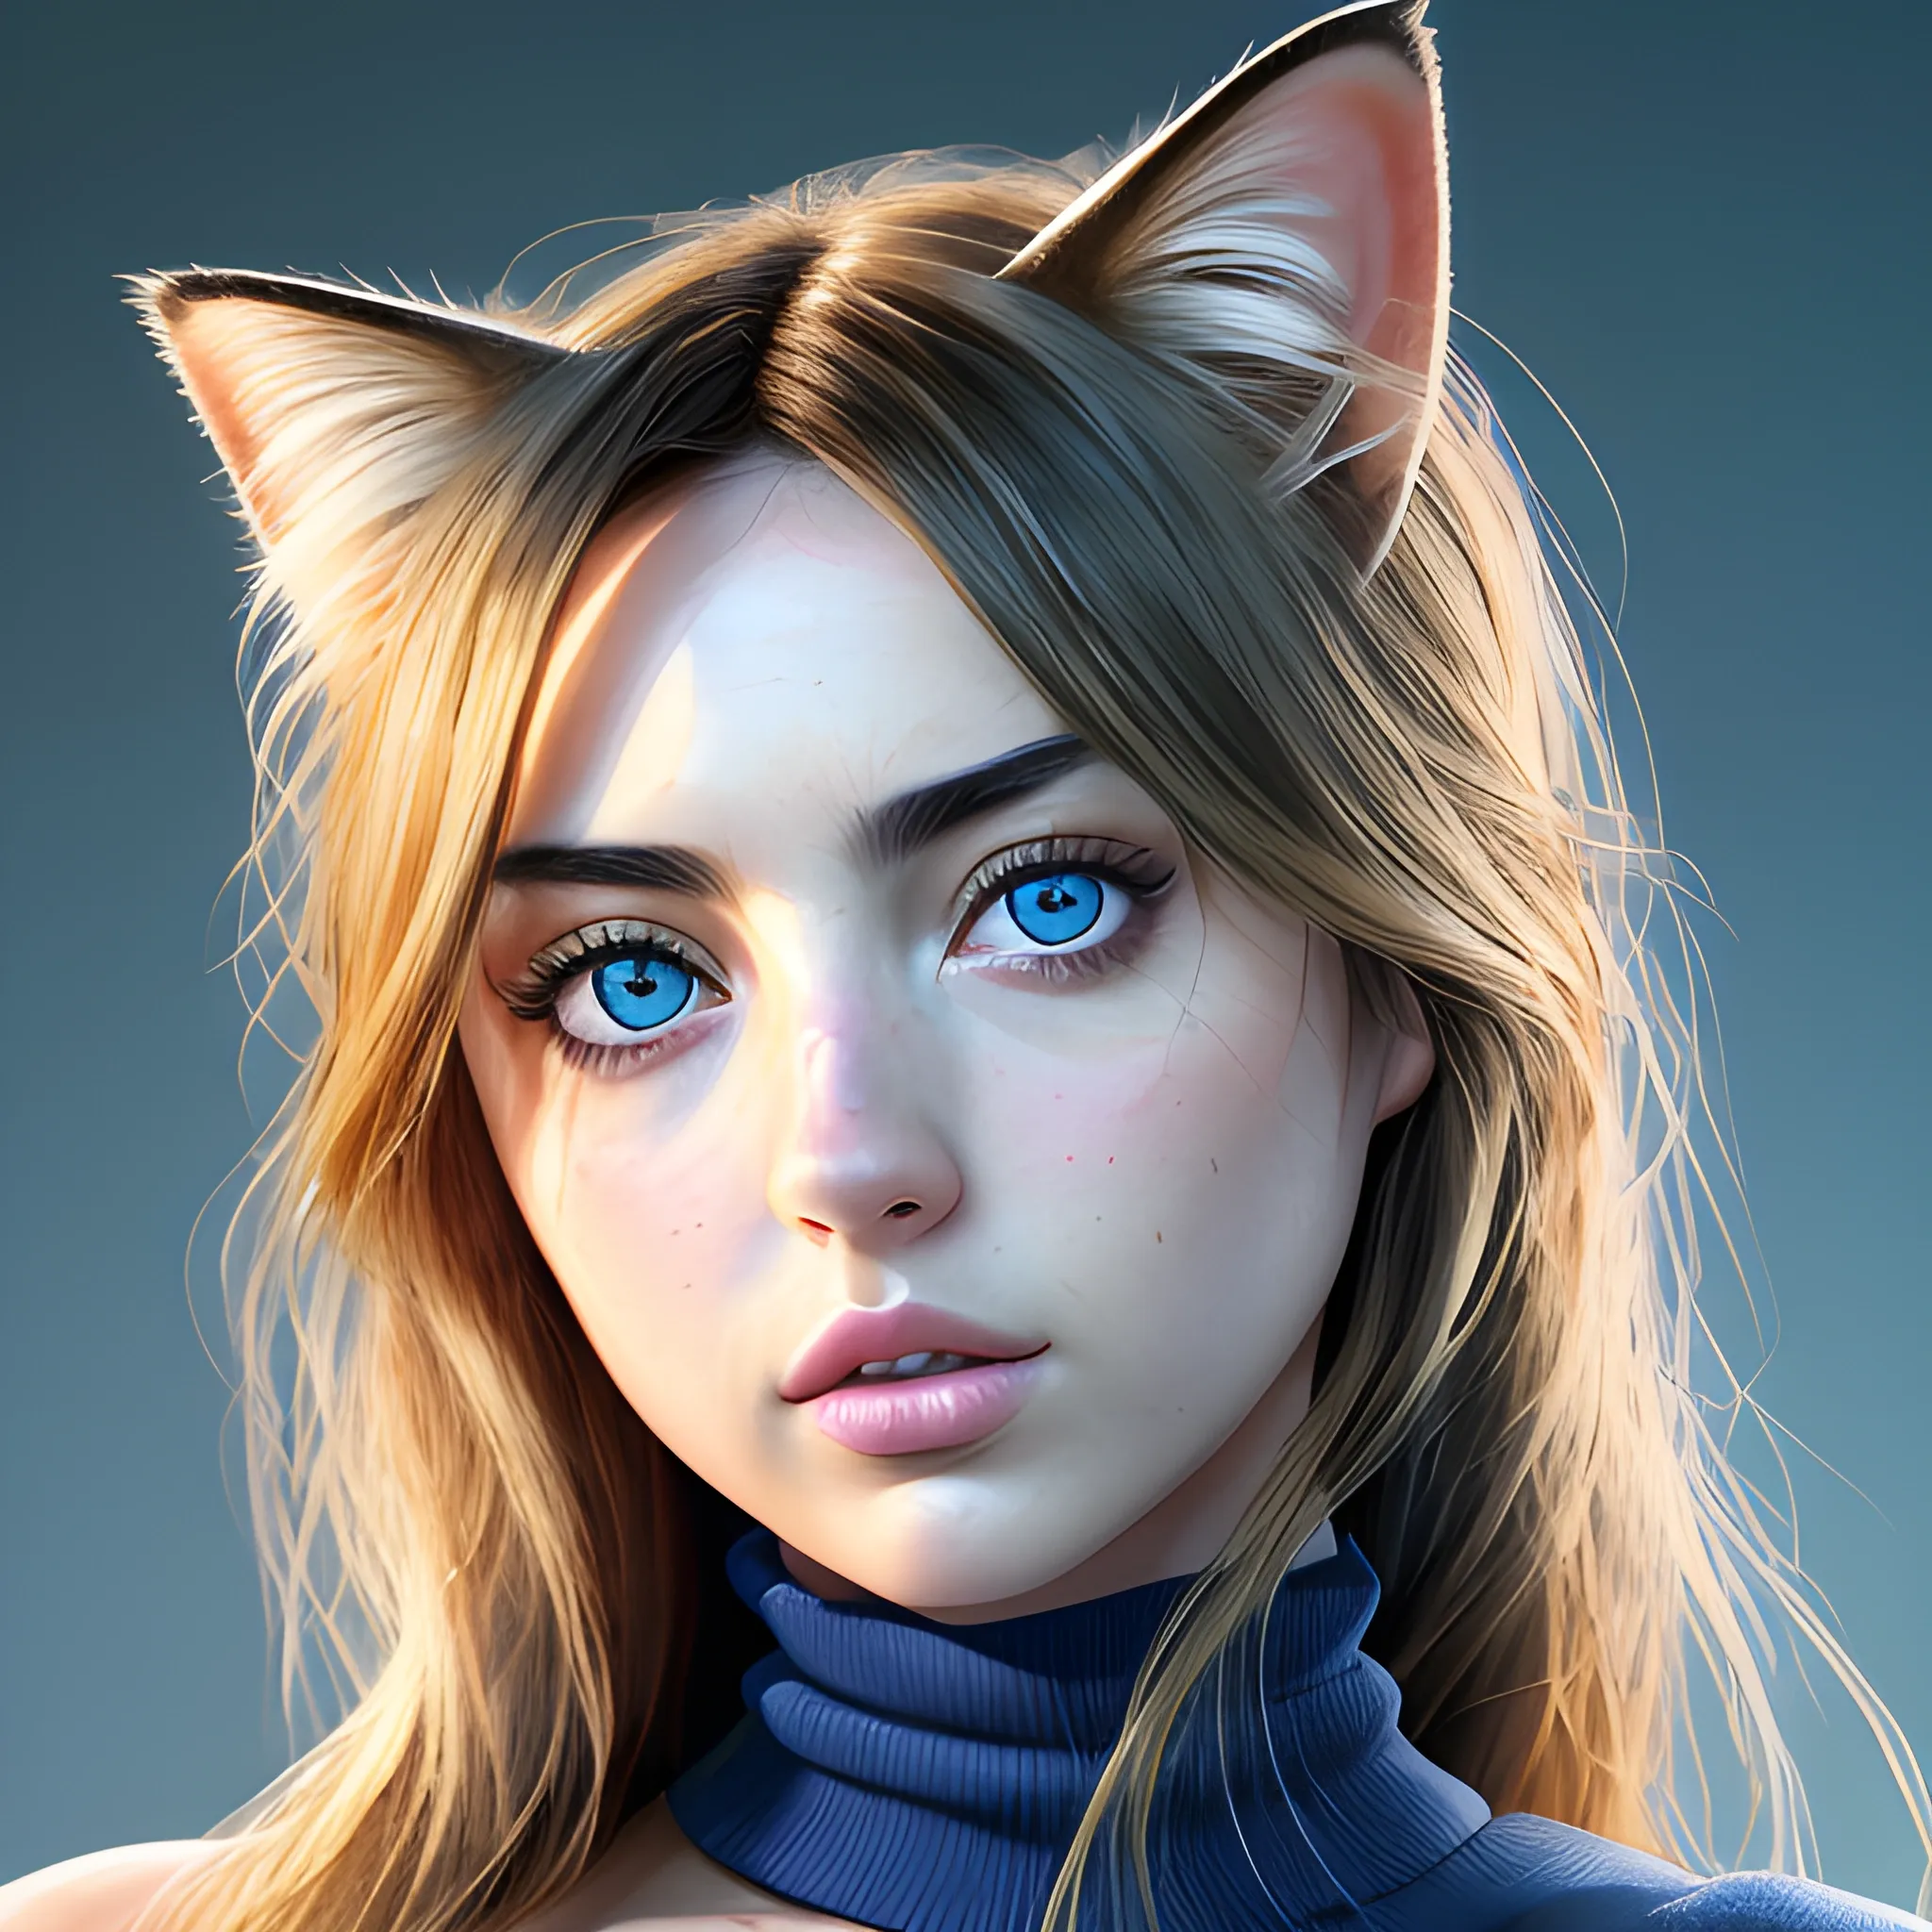 (aesthetic), (beautiful), (upper blody), , (professional angle), (rule of thirds), (Feminine), (female), (beautiful),(feminine features), (20 years) (ana de armas face), solo, 1 woman, (attractive Japanese), (Casual look), (long hair), (woman with a cat-like appearance),(huge blue eyes),(Add feline fur spots in her hair),  (by Artist bruce timm:1),(high quality), (detailed), (masterpiece), (best quality), (highres), (extremely detailed),(8k, RAW photo, best quality,(realistic, photo-realistic:1.37), ultra-detailed